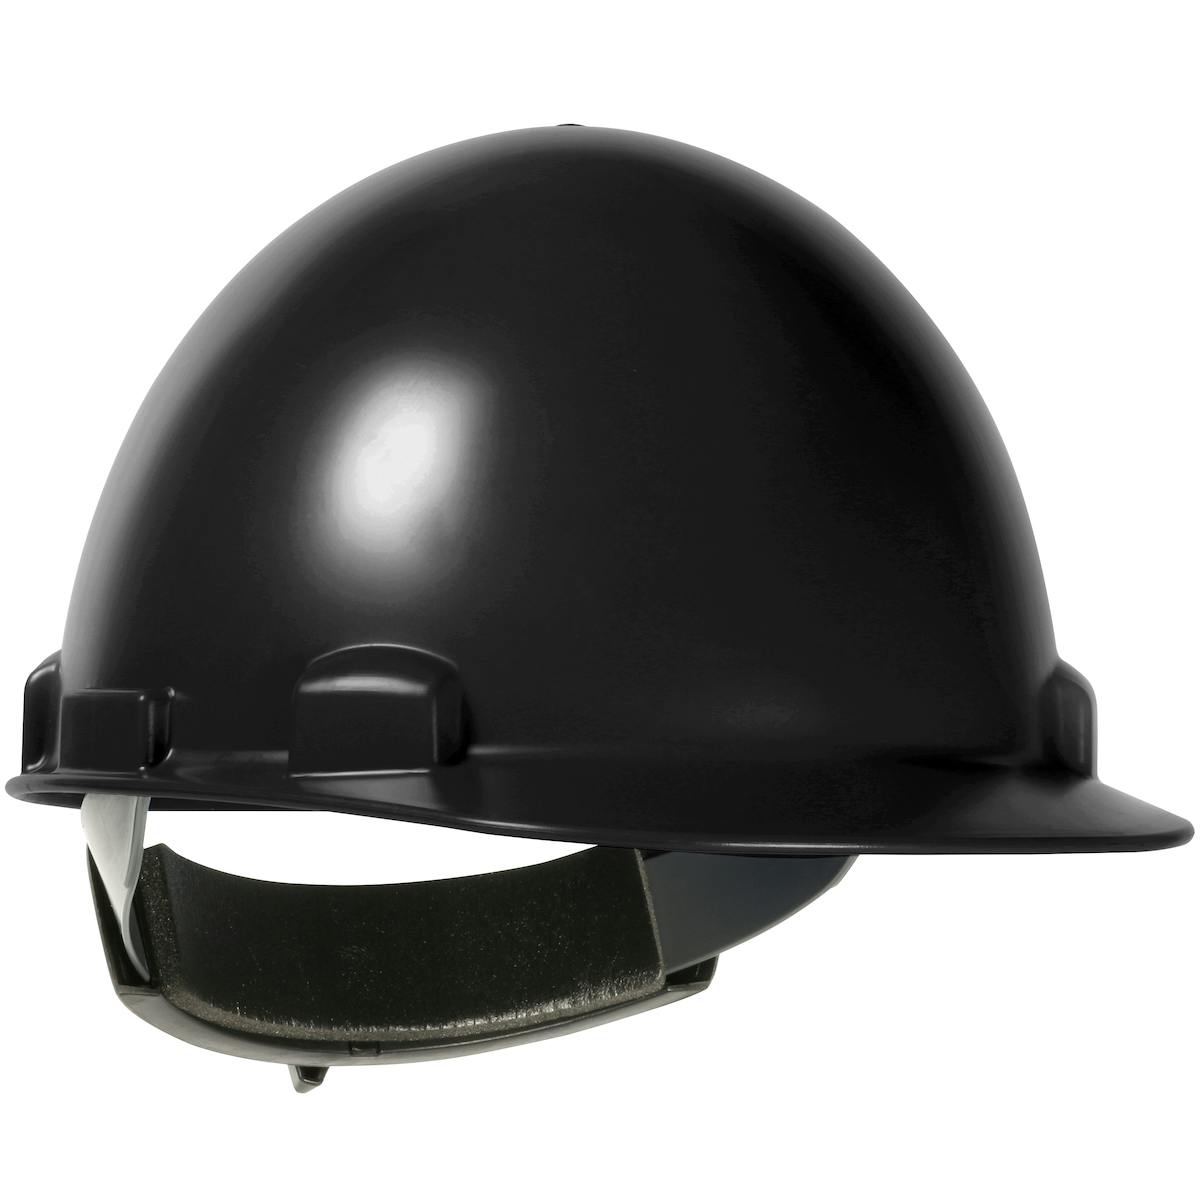 Stromboli™ Type II, Cap Style Smooth Dome Hard Hat with ABS/Polycarbonate Shell, 4-Point Textile Suspension and Wheel Ratchet Adjustment (280-HP842R)